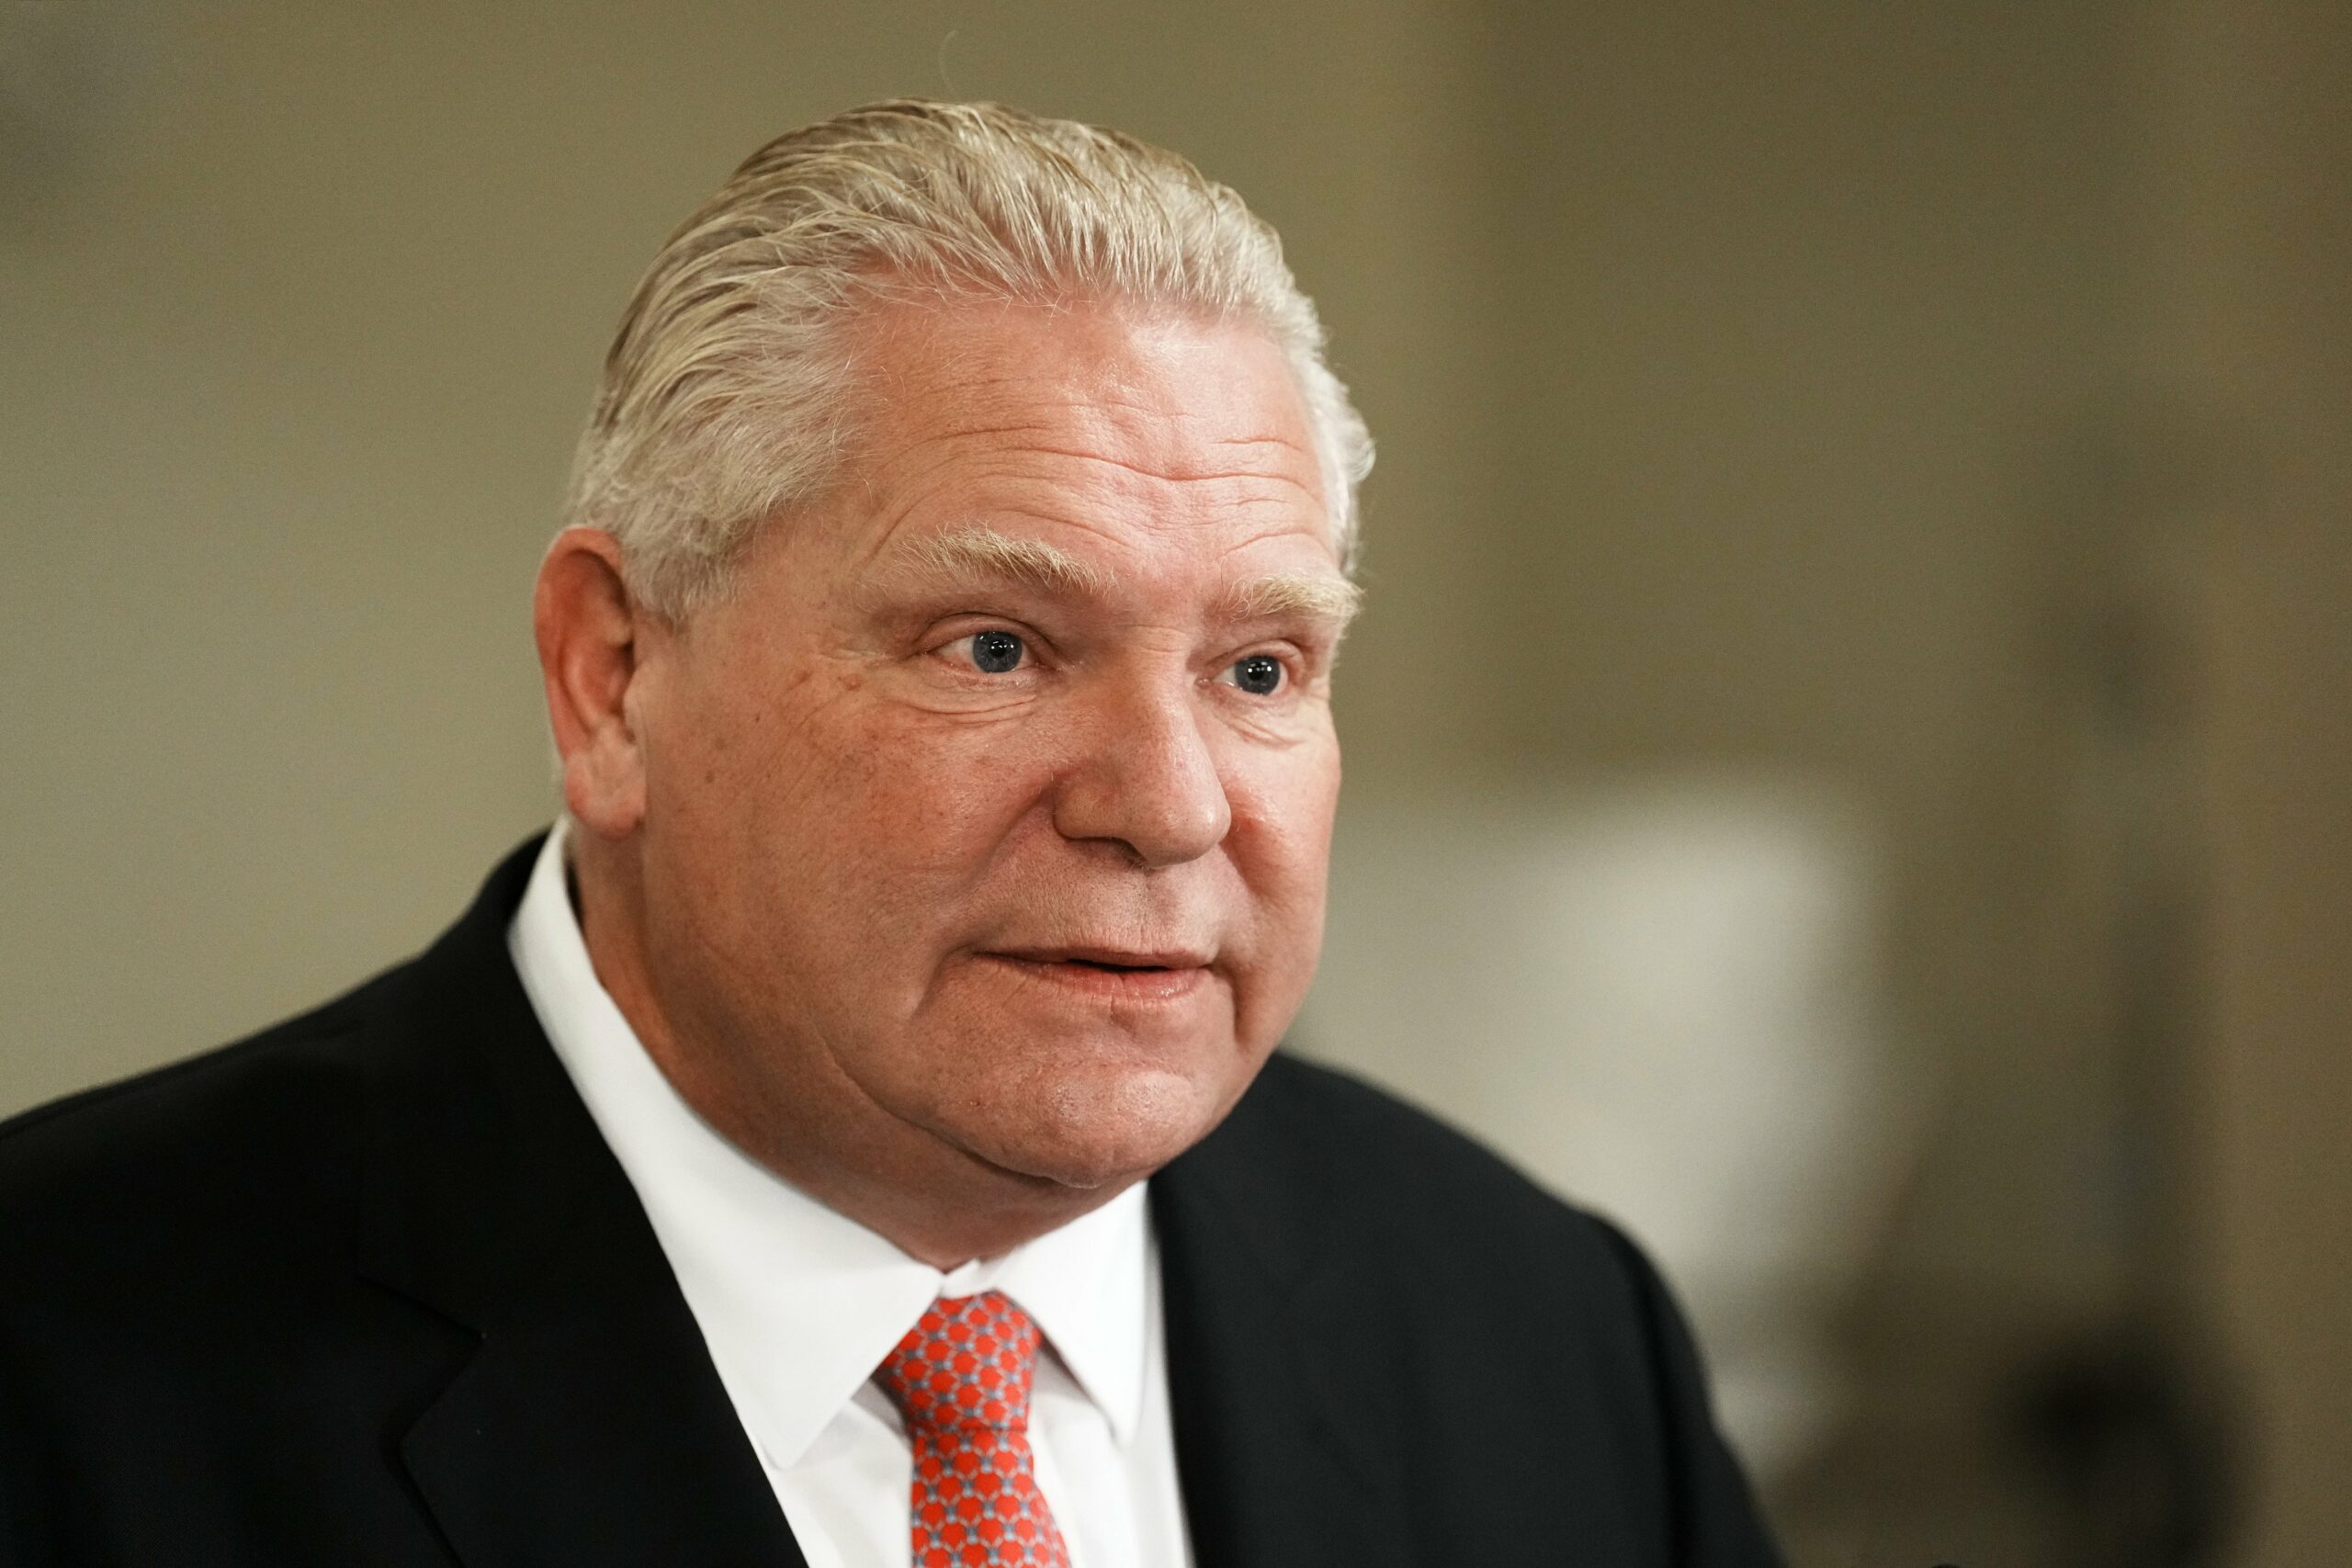 ROMA 2023: Ford veers off-script to praise low taxes, downplay recession fears